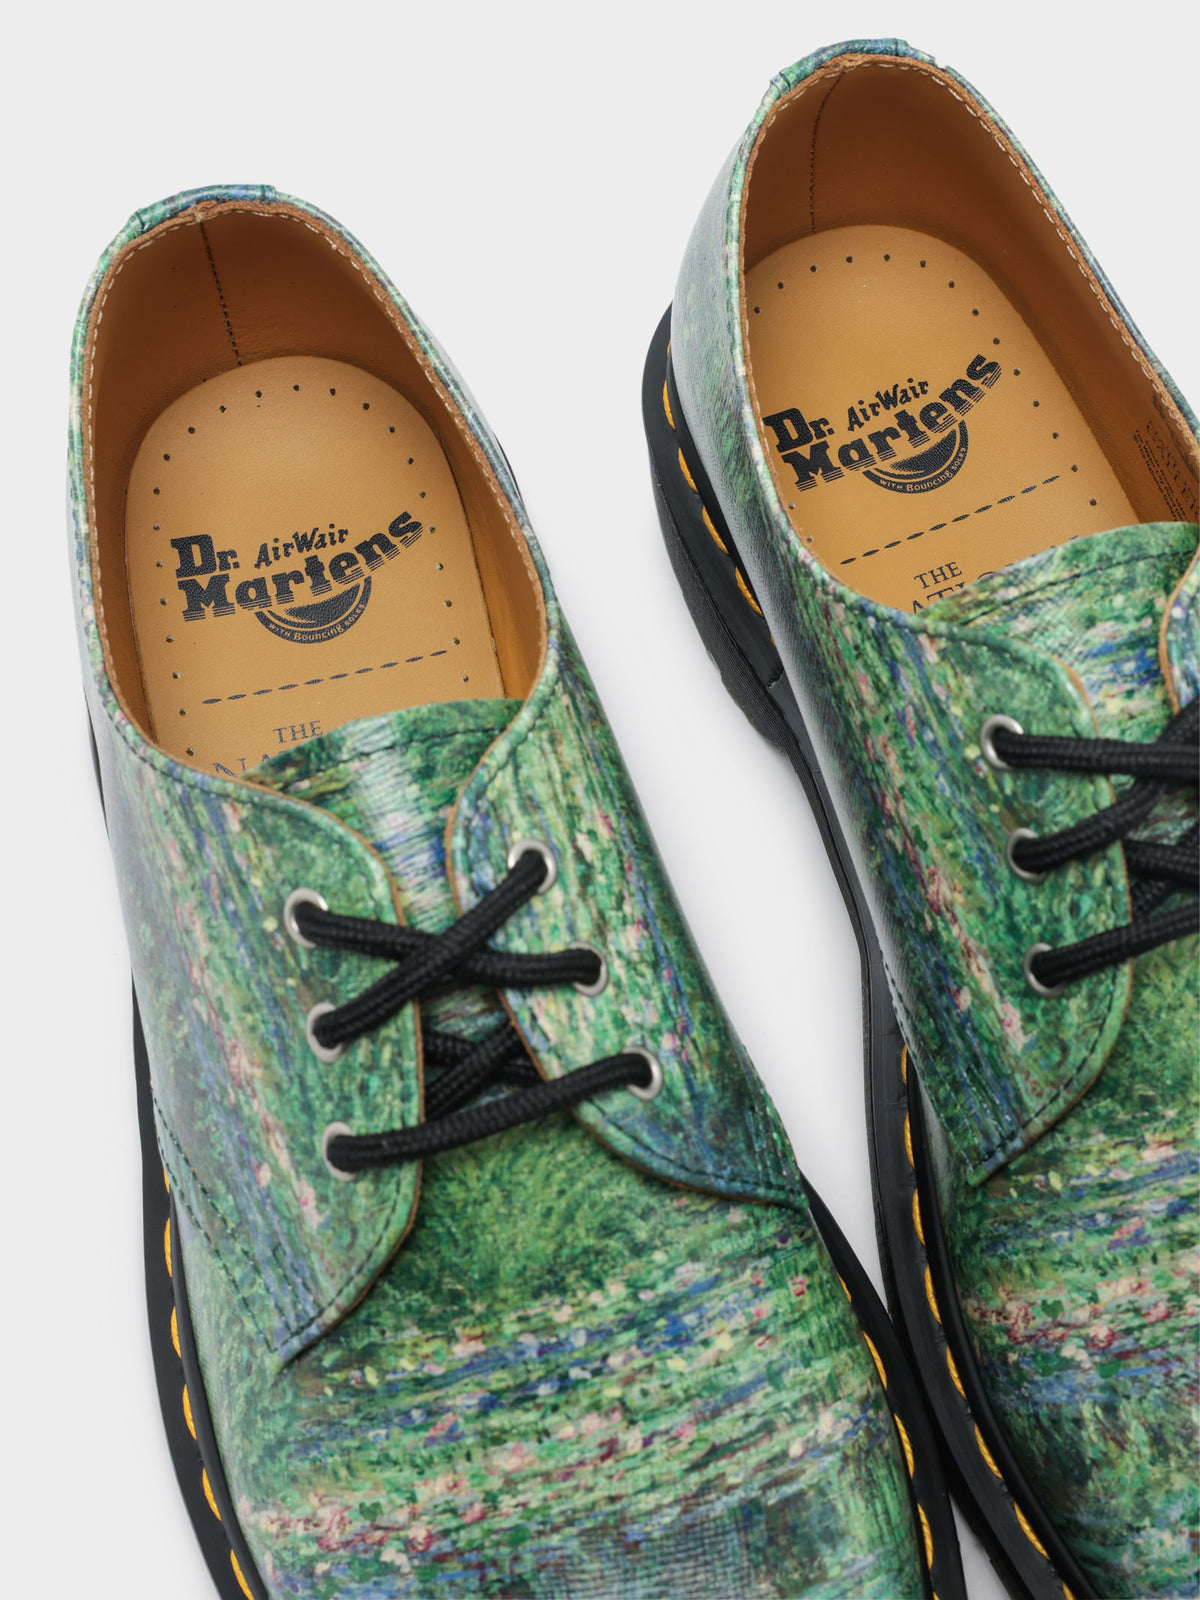 Unisex Dr Martens x National Gallery Monet Lily Pad 1460 Shoes in Green